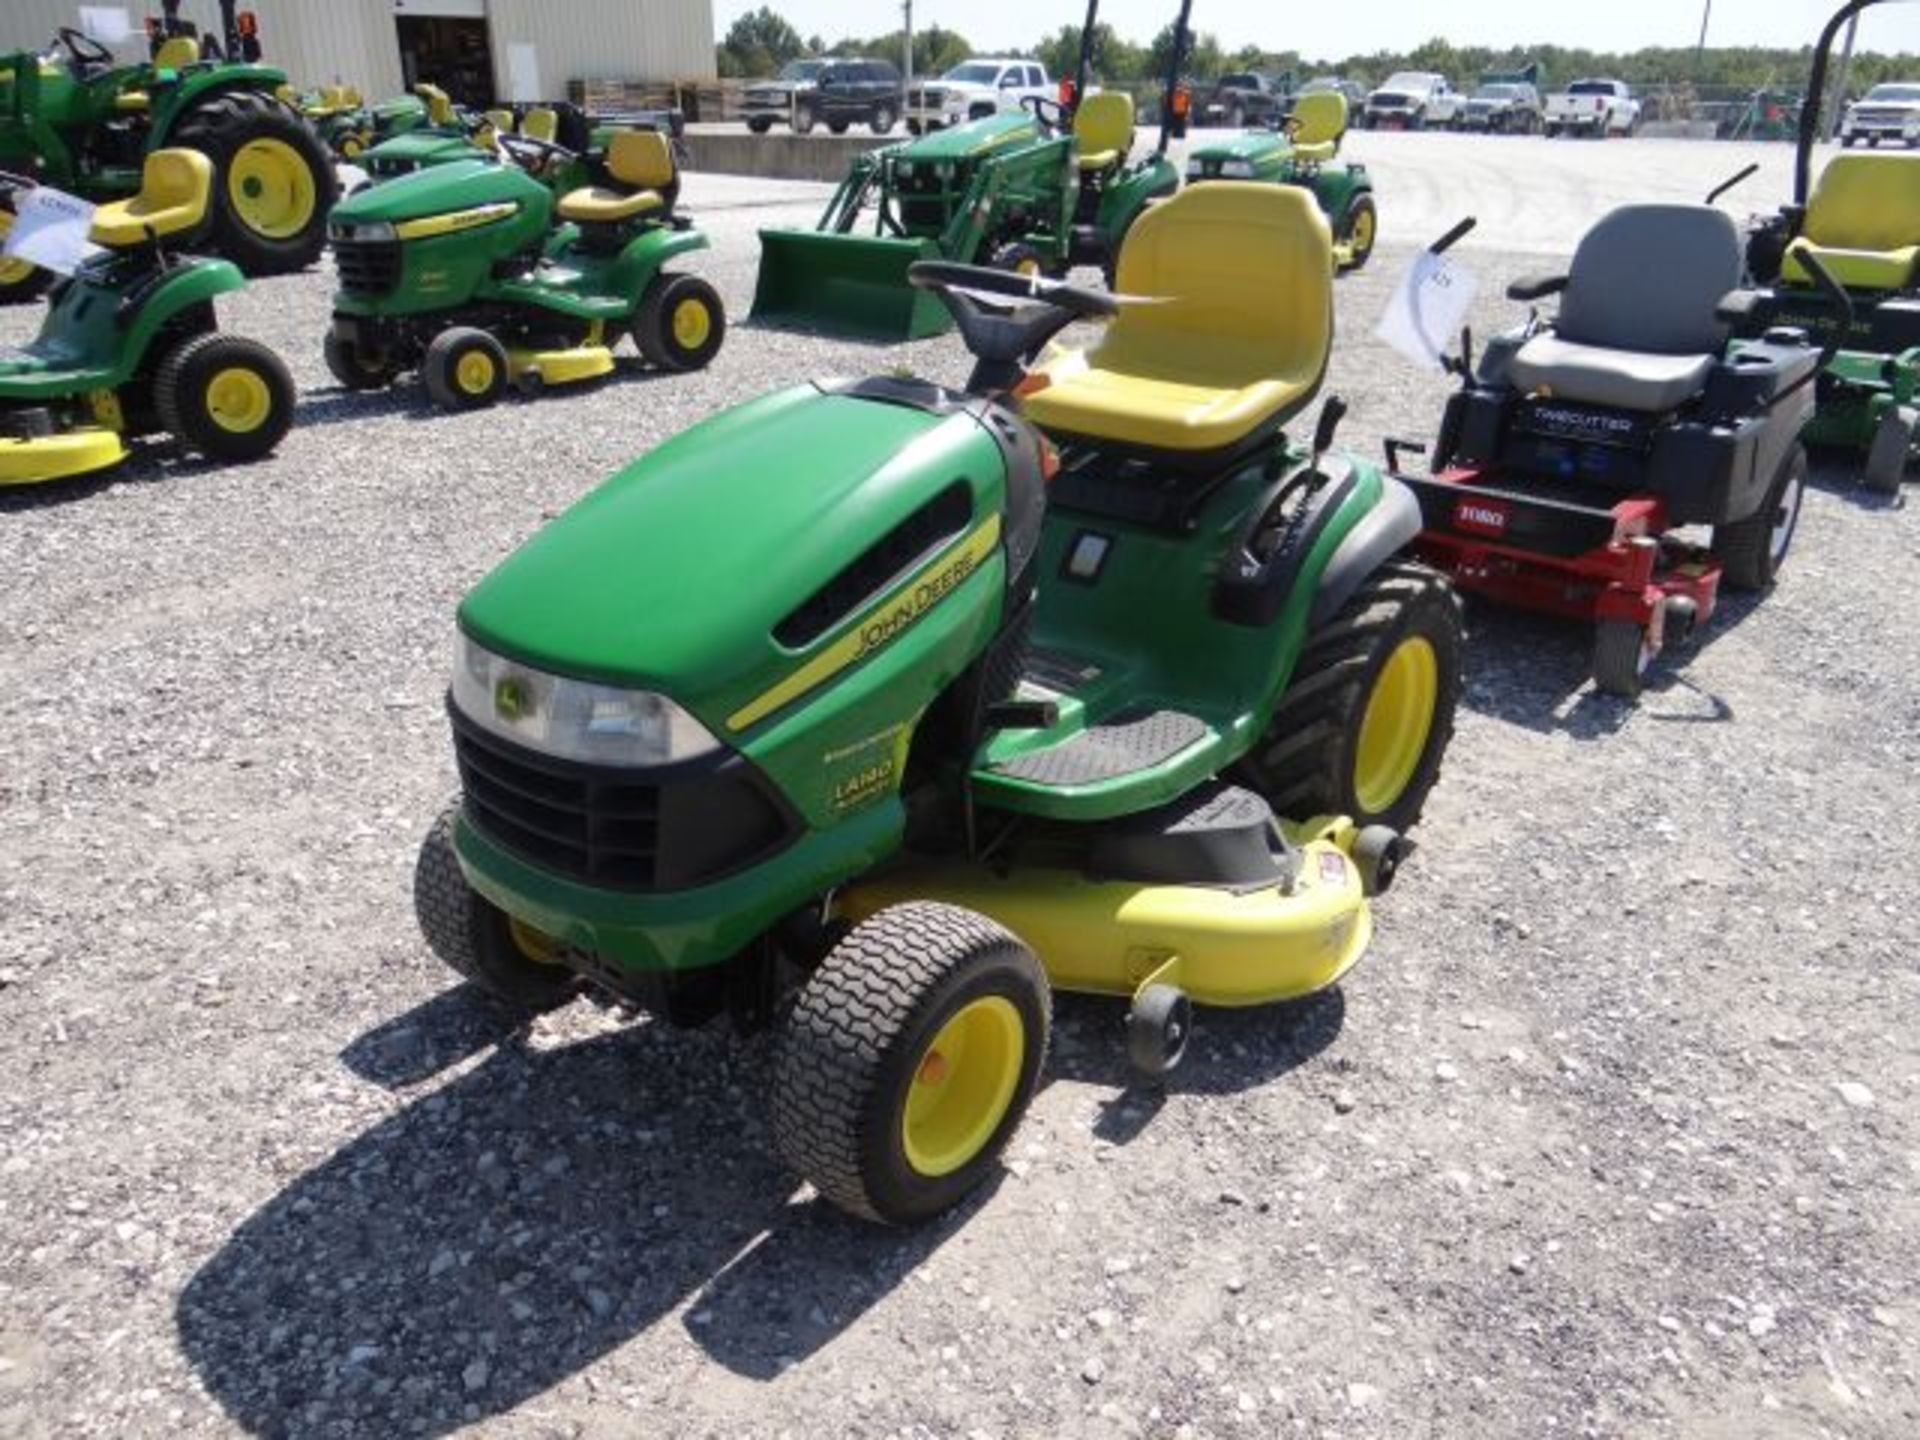 2007 JD LA140 Mower 164 hrs, 23hp Briggs, V-Twin, Air Cooled, Hydro, Transmission Weak, Salvage - Image 2 of 3